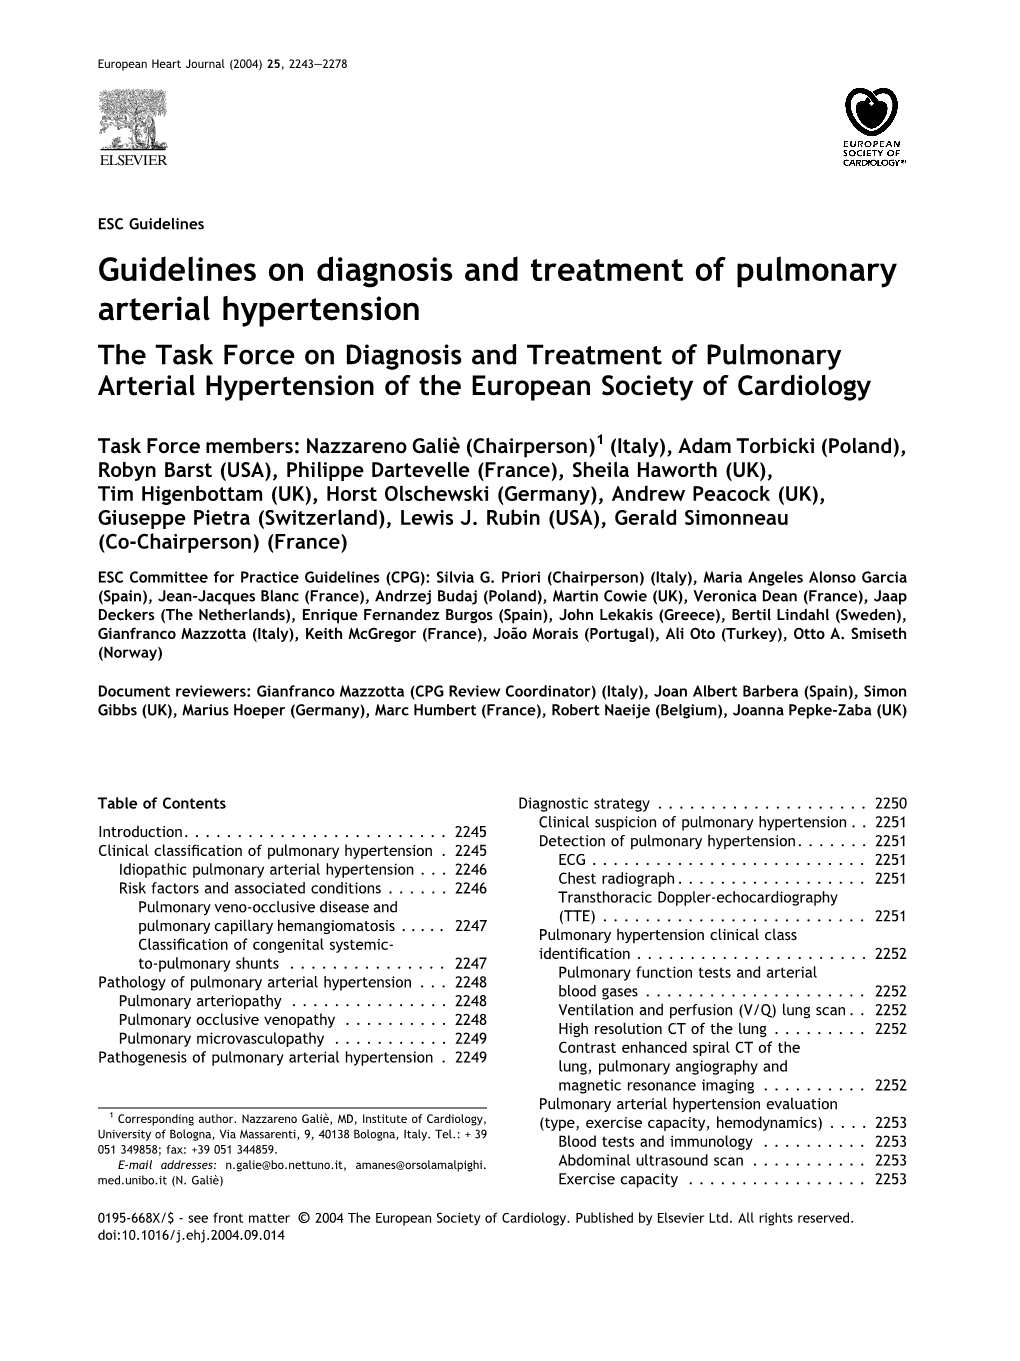 Guidelines on Diagnosis and Treatment of Pulmonary Arterial